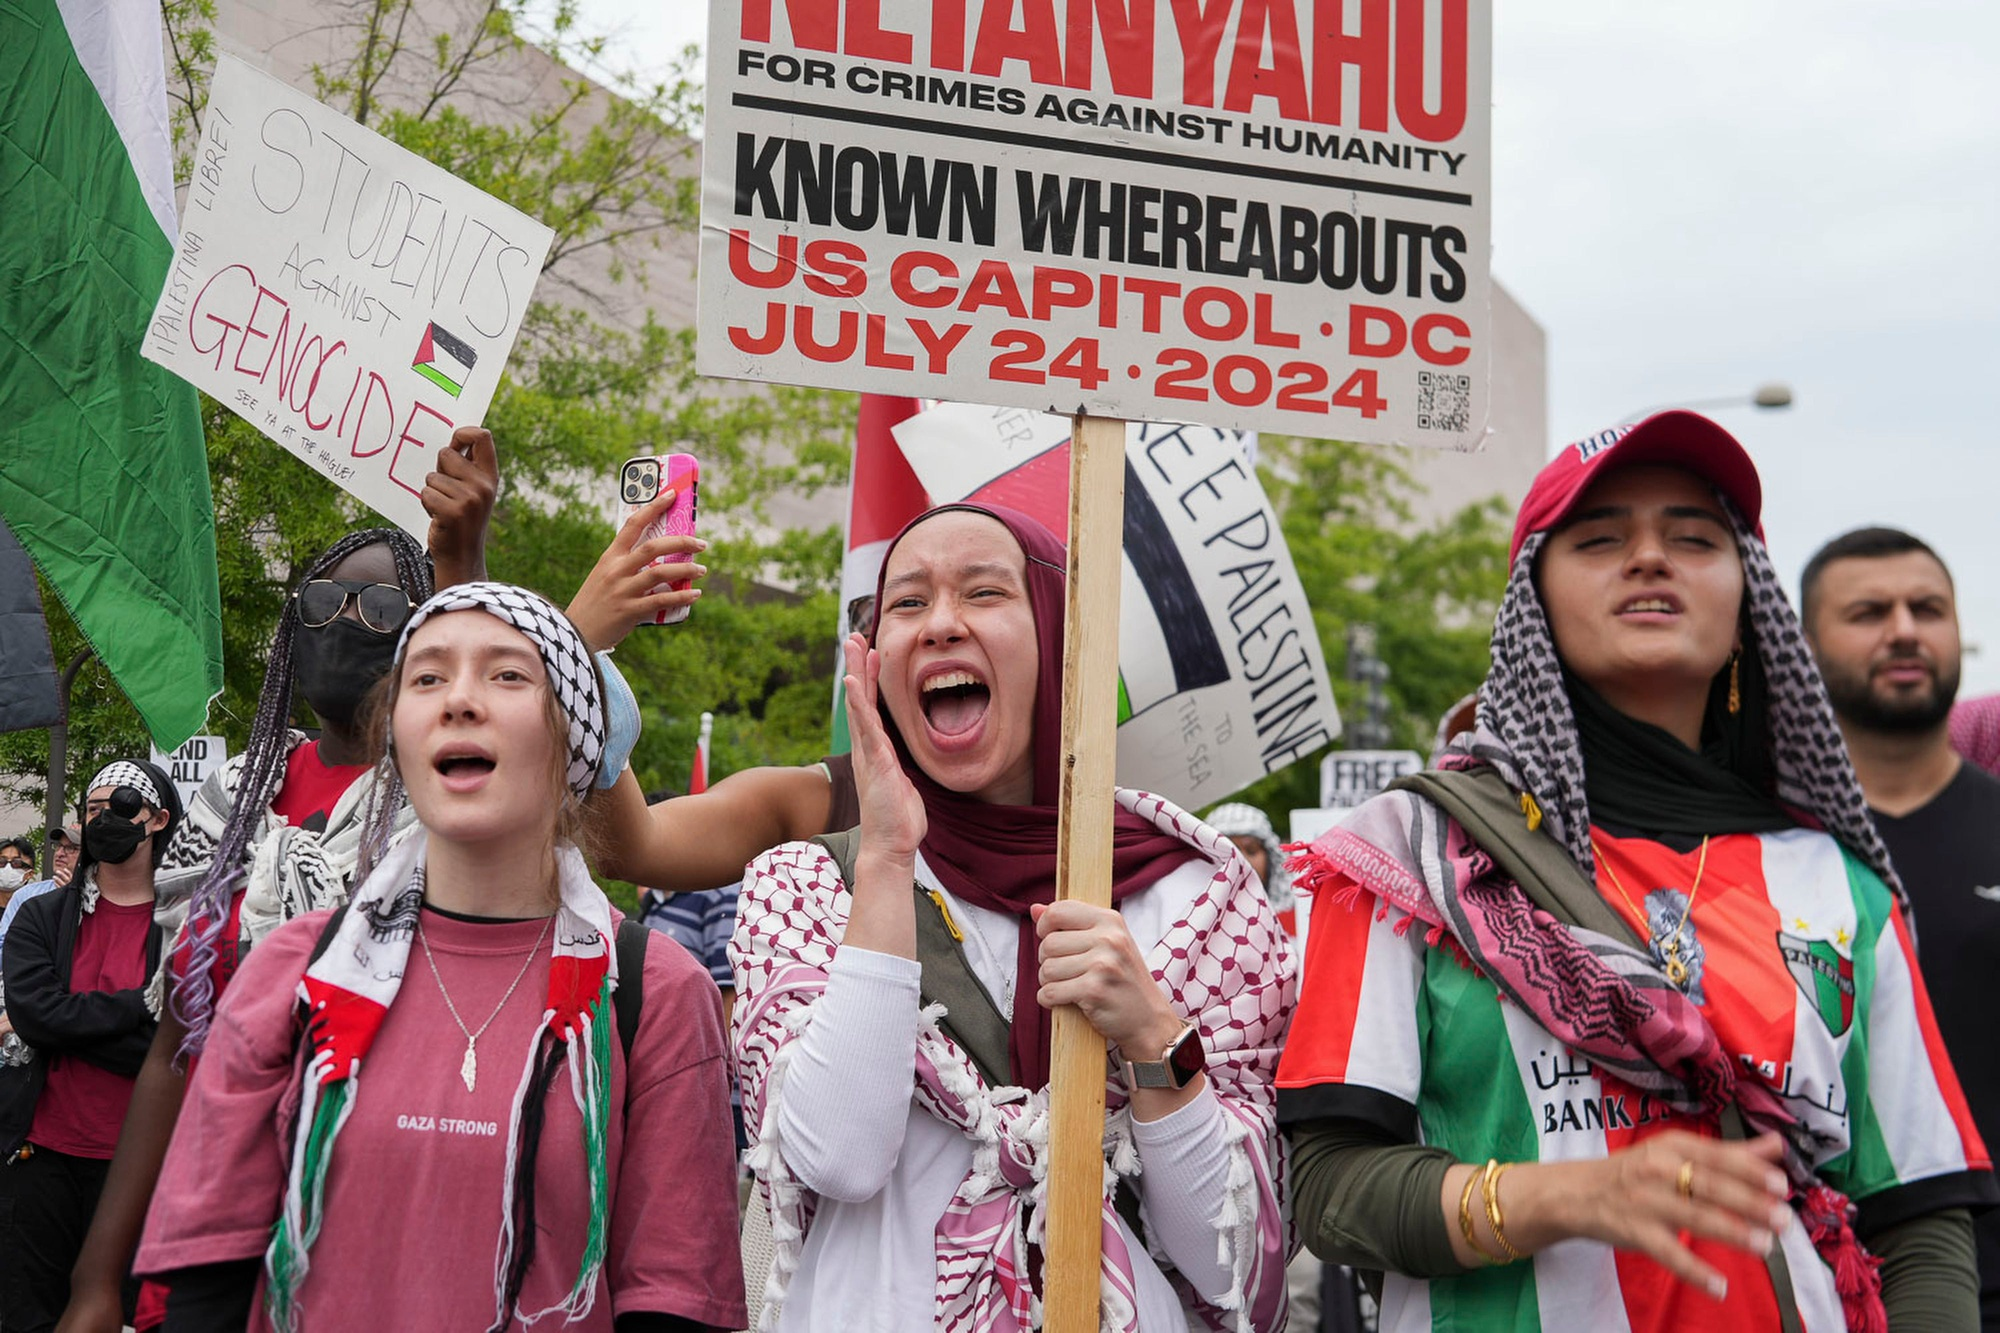 Understanding the World’s Rage: Why Do Many Young Americans Support Palestinians?